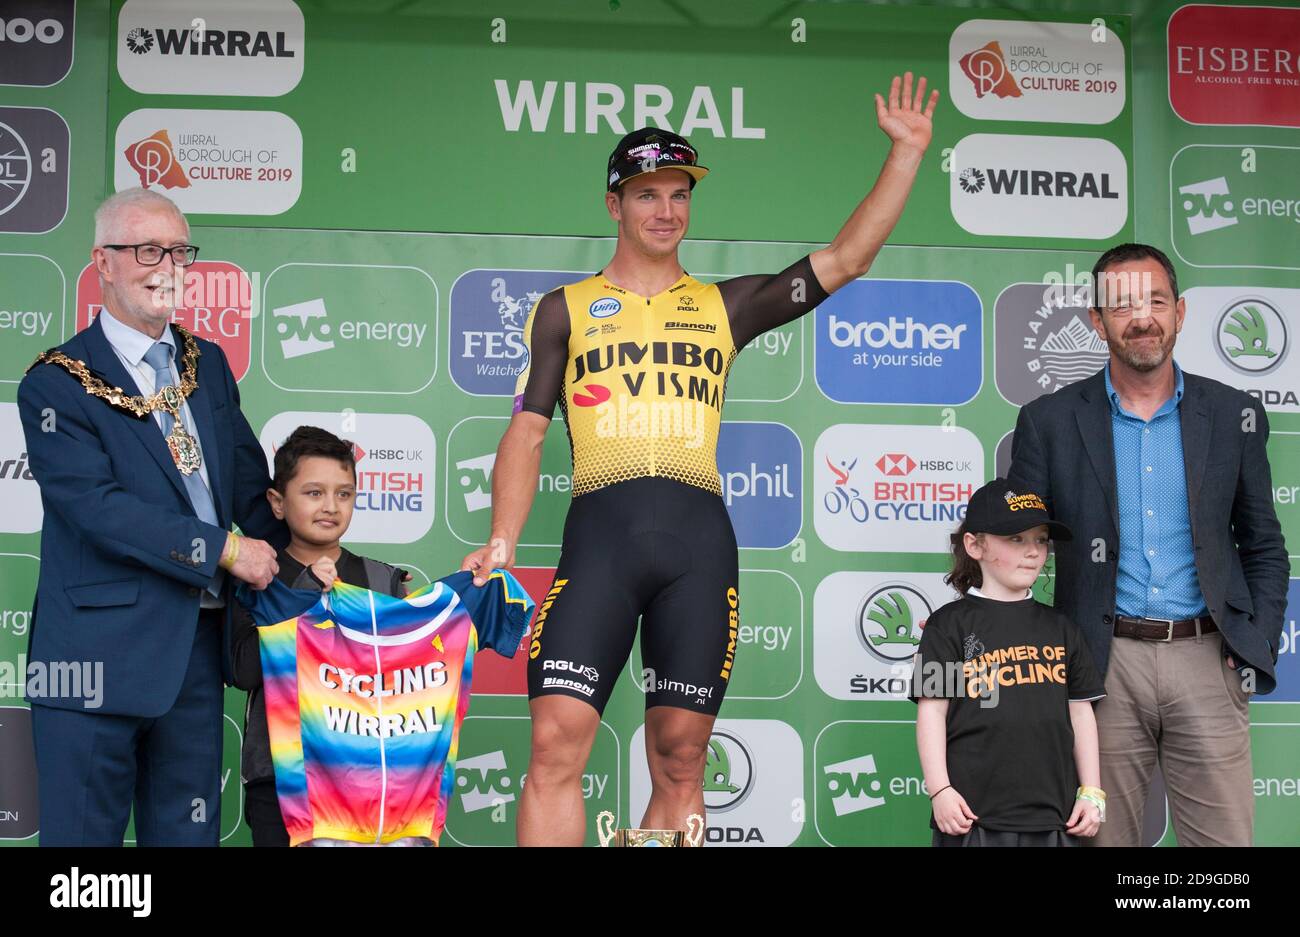 Dylan Groenewegen after winning the stage. Riders were taking part in the Wirral Stage (Stage 5) of the 2019 Tour of Britain. The overall General Classification was won by Mathieu van der Poel. Stock Photo